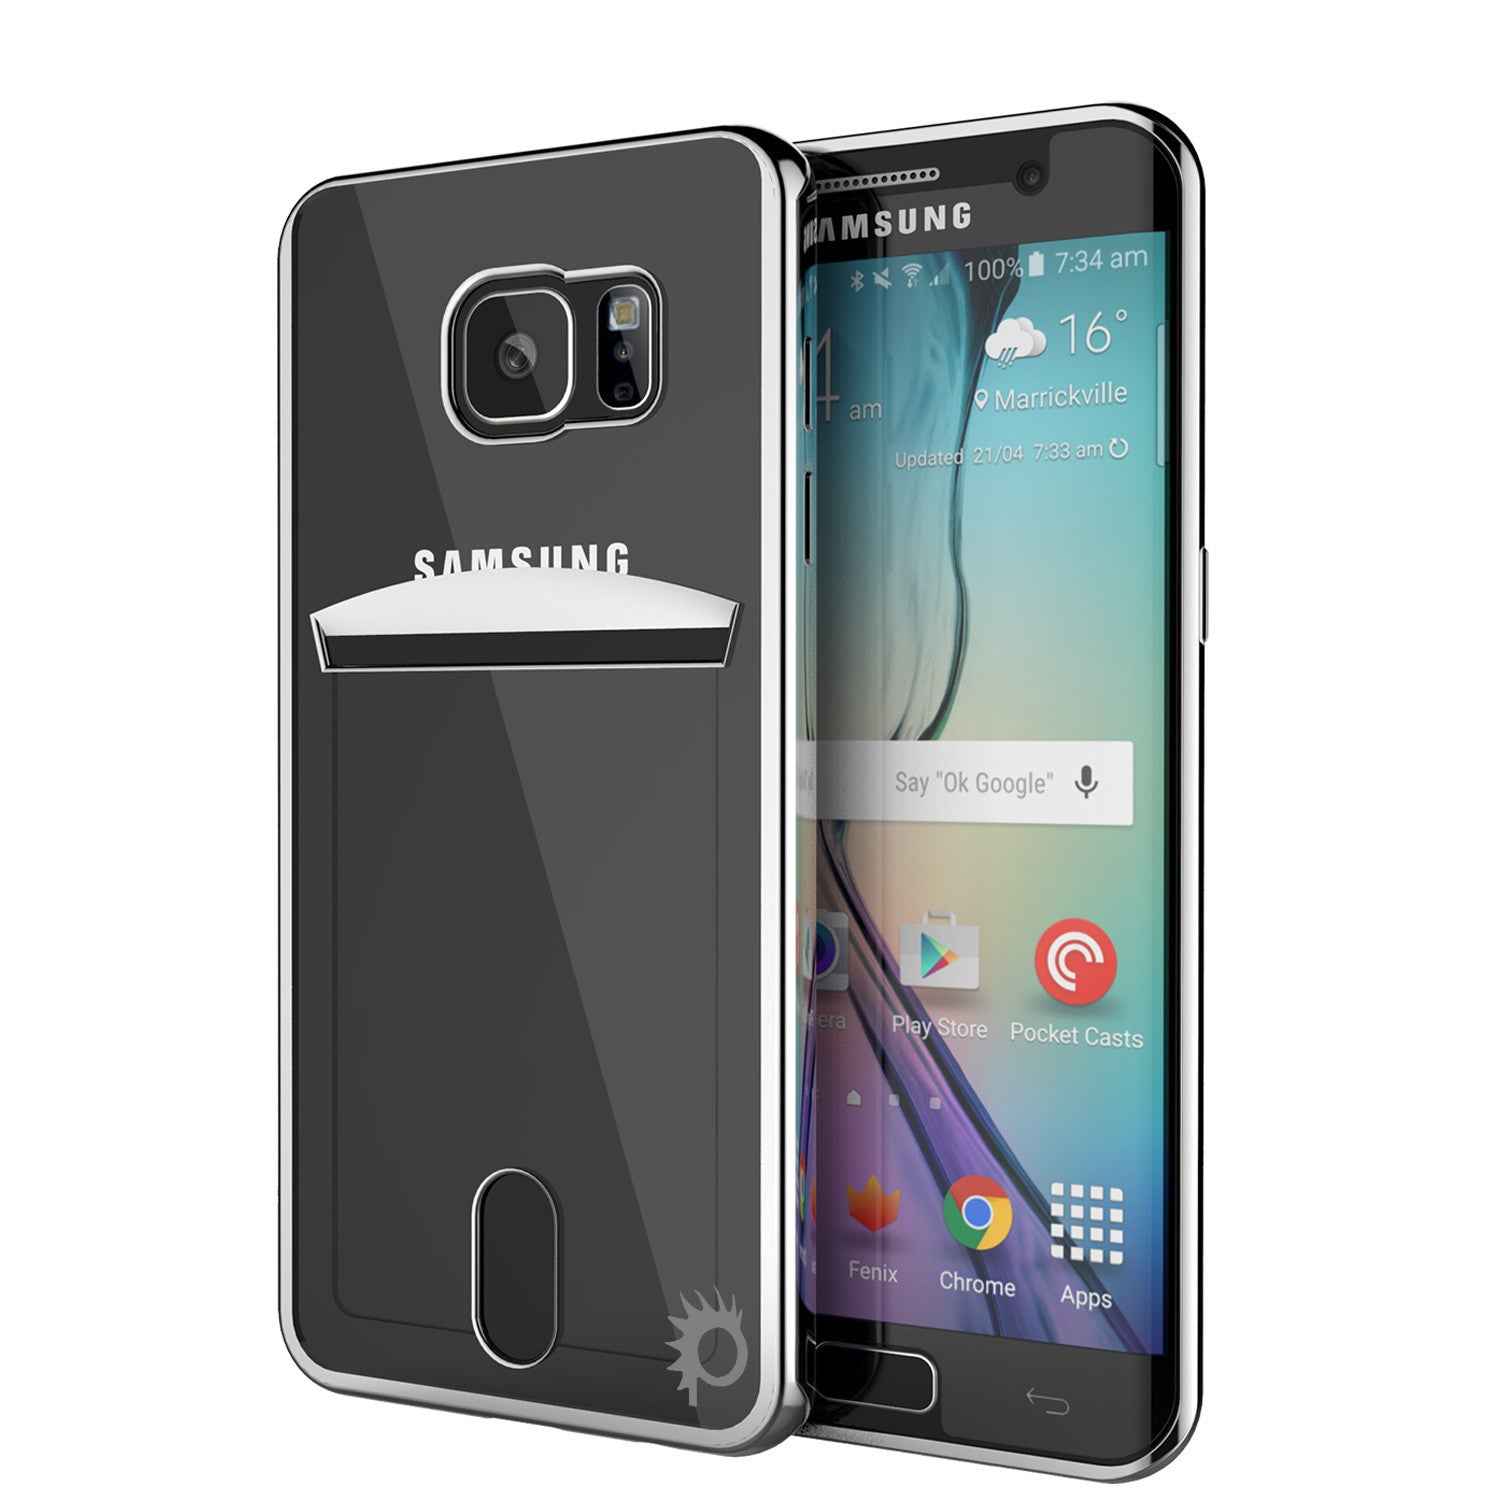 Galaxy S6 EDGE+ Plus Case, PUNKCASE® LUCID Silver Series | Card Slot | SHIELD Screen Protector (Color in image: Silver)